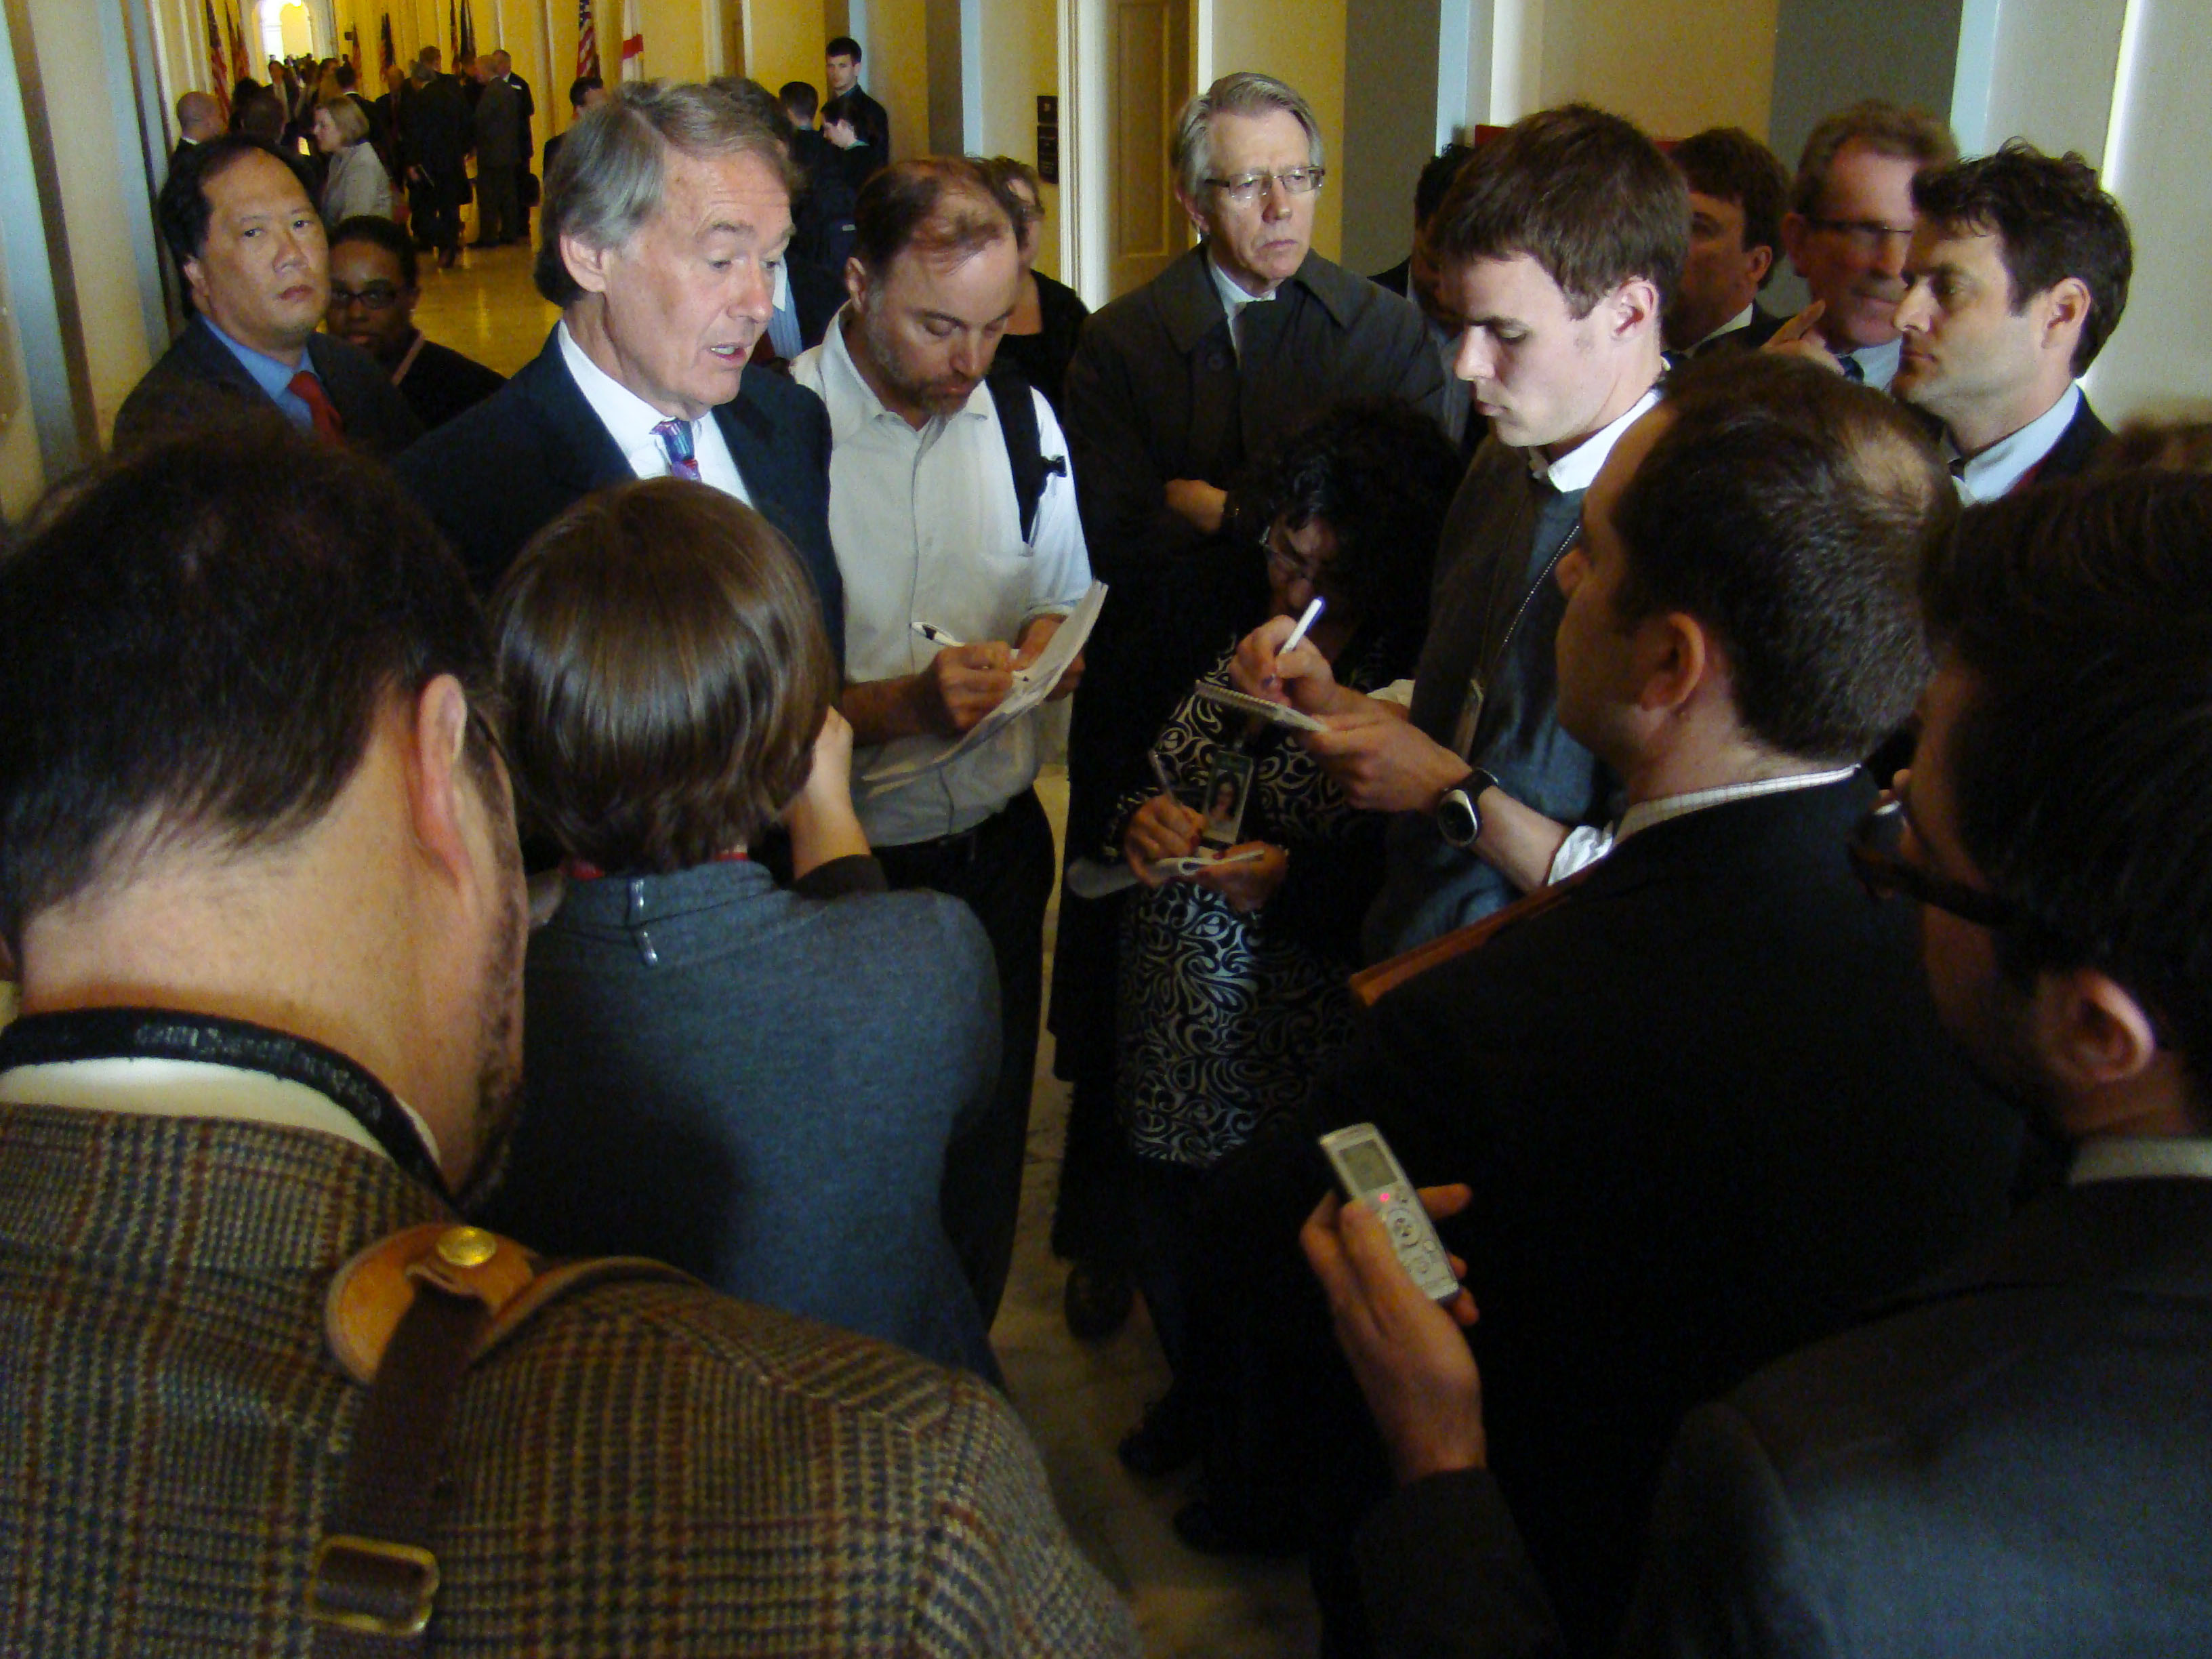 Chairman Markey after the hearing